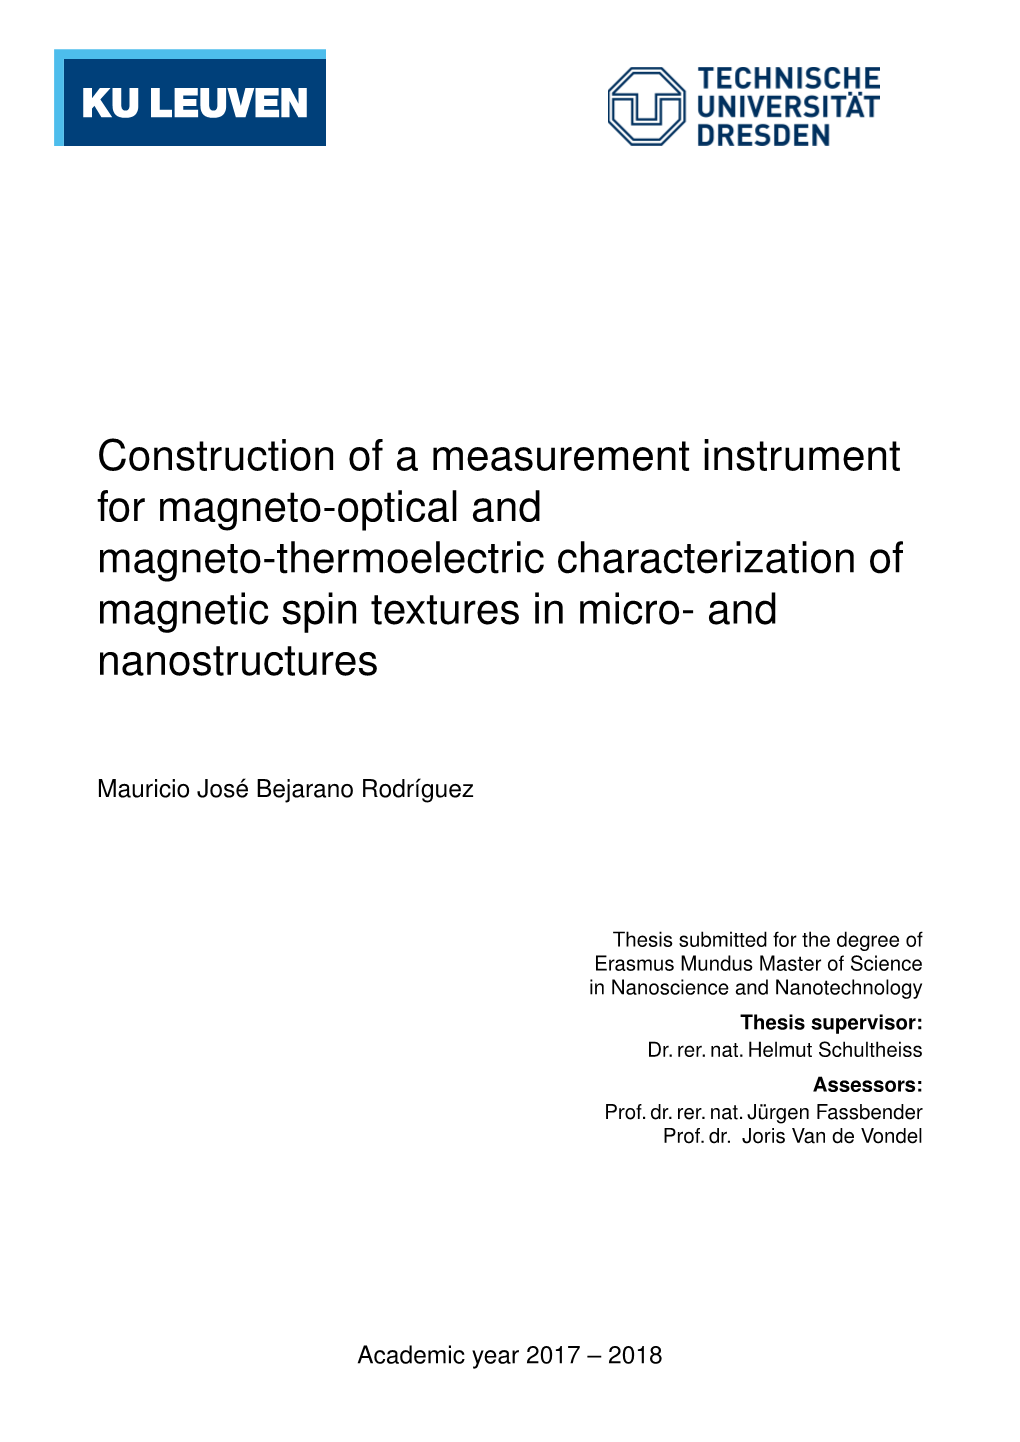 Construction of a Measurement Instrument for Magneto-Optical and Magneto-Thermoelectric Characterization of Magnetic Spin Textures in Micro- and Nanostructures